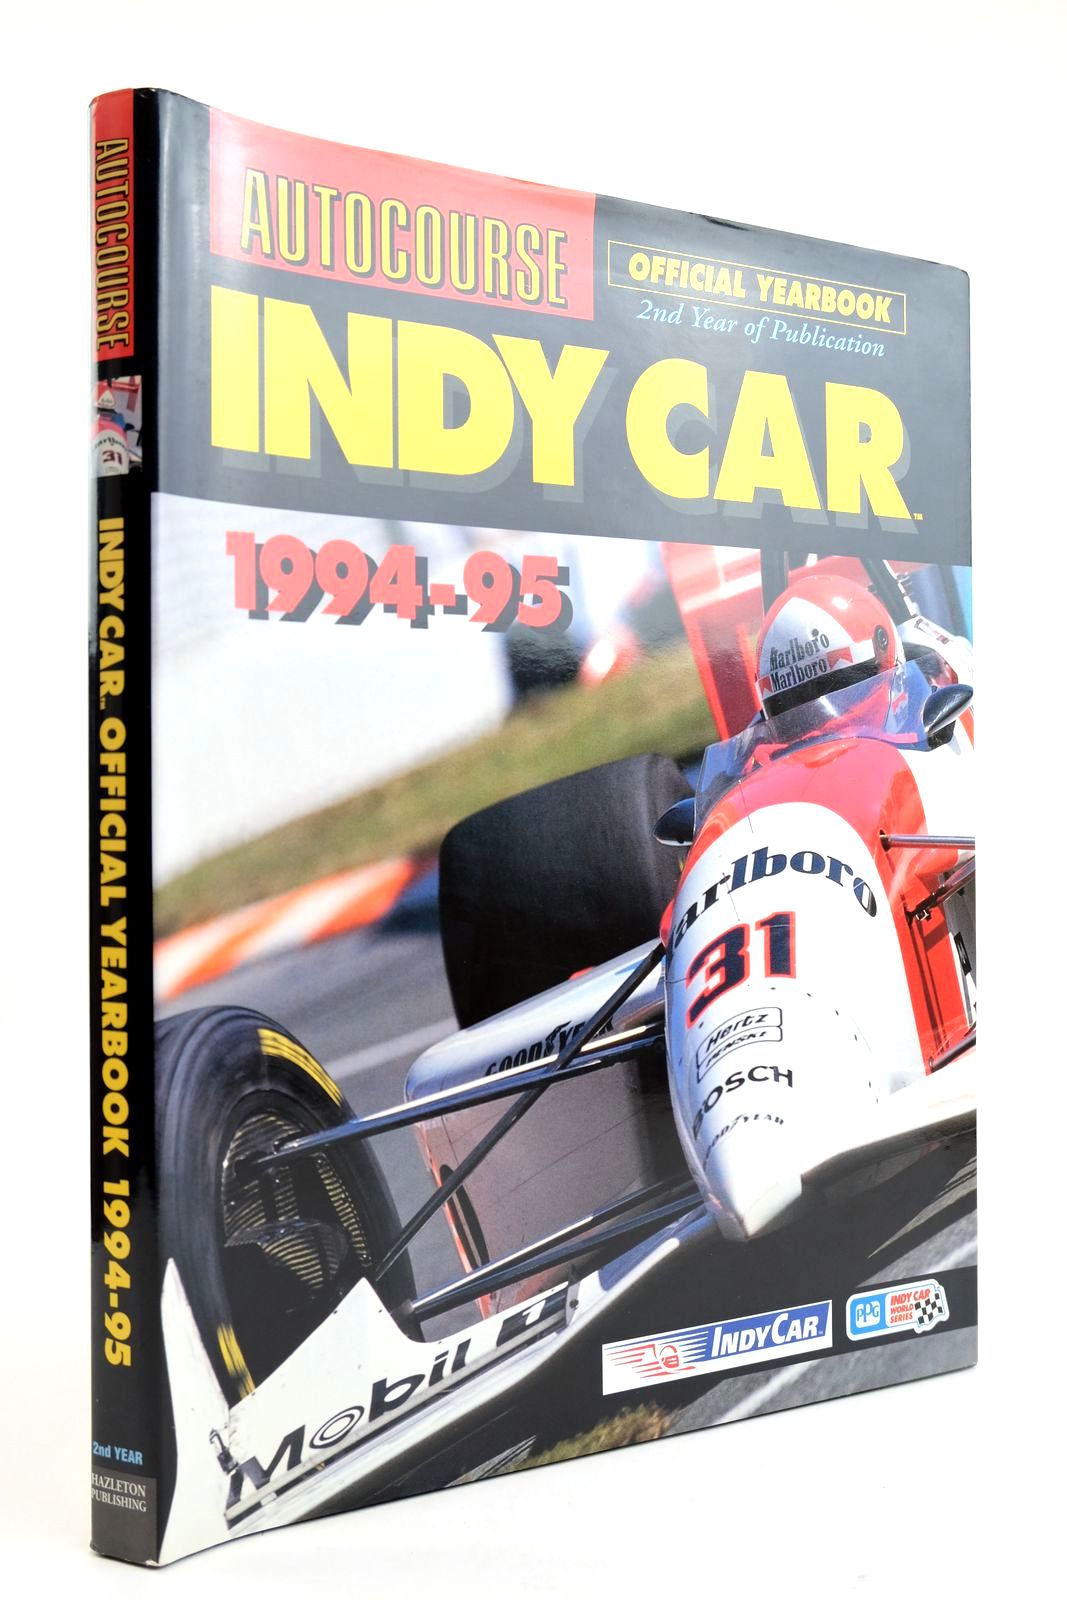 Photo of AUTOCOURSE INDY CAR 1994-95 published by Hazleton Publishing (STOCK CODE: 2132755)  for sale by Stella & Rose's Books